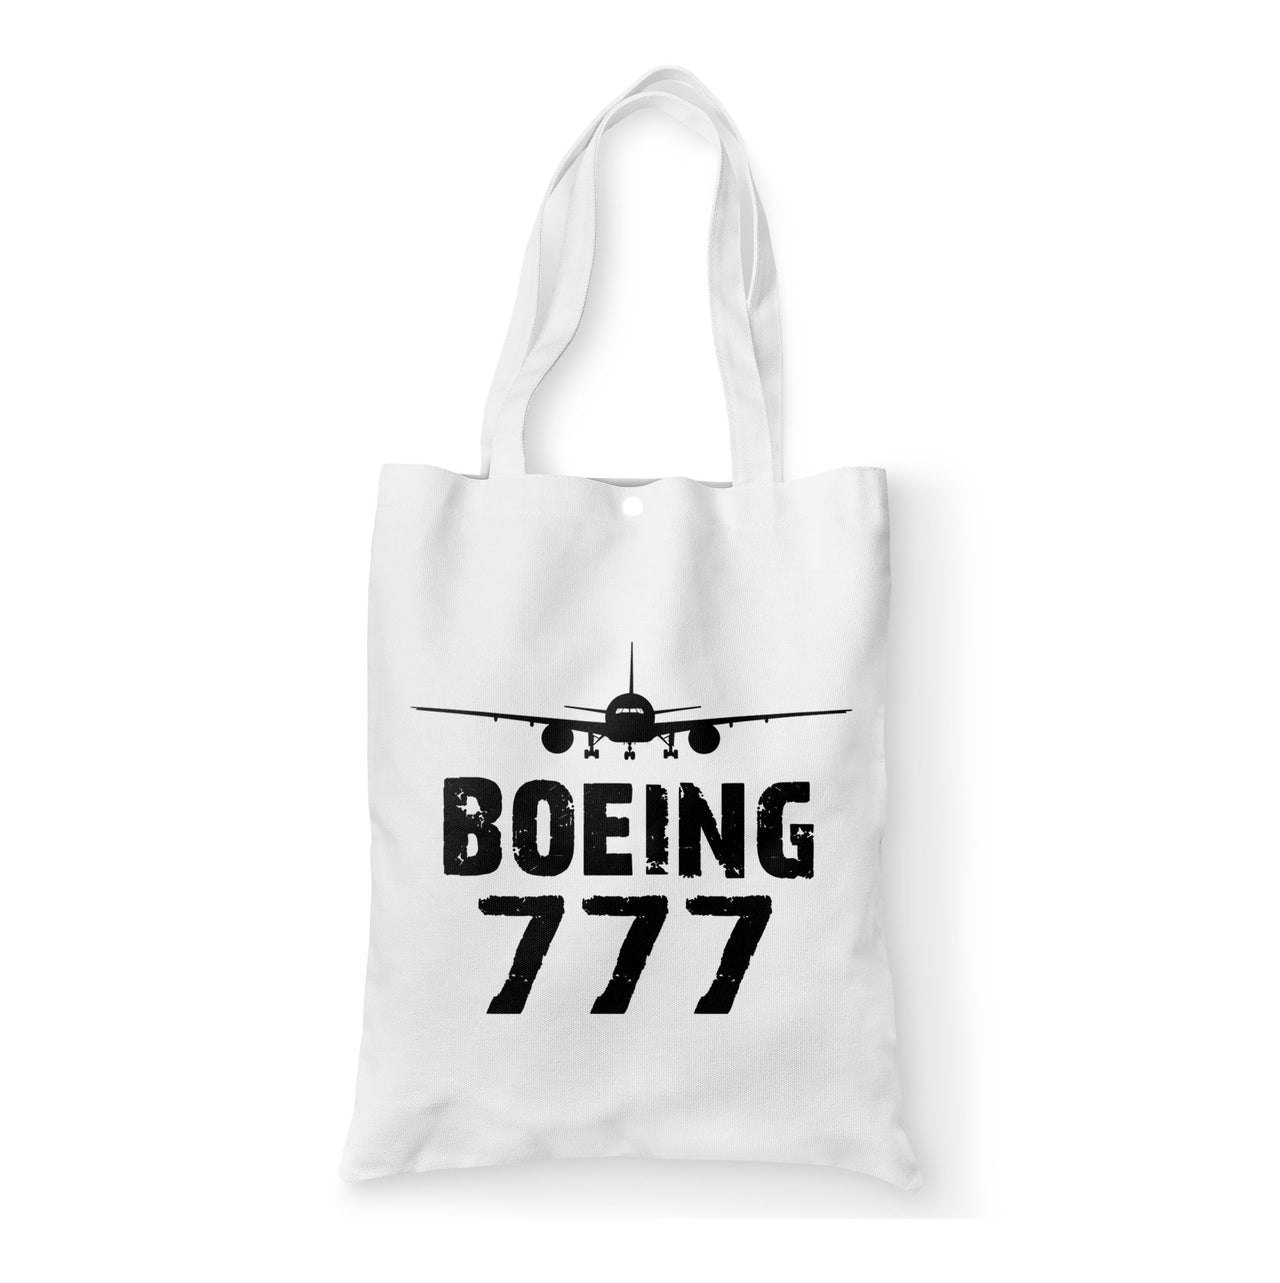 Boeing 777 & Plane Designed Tote Bags